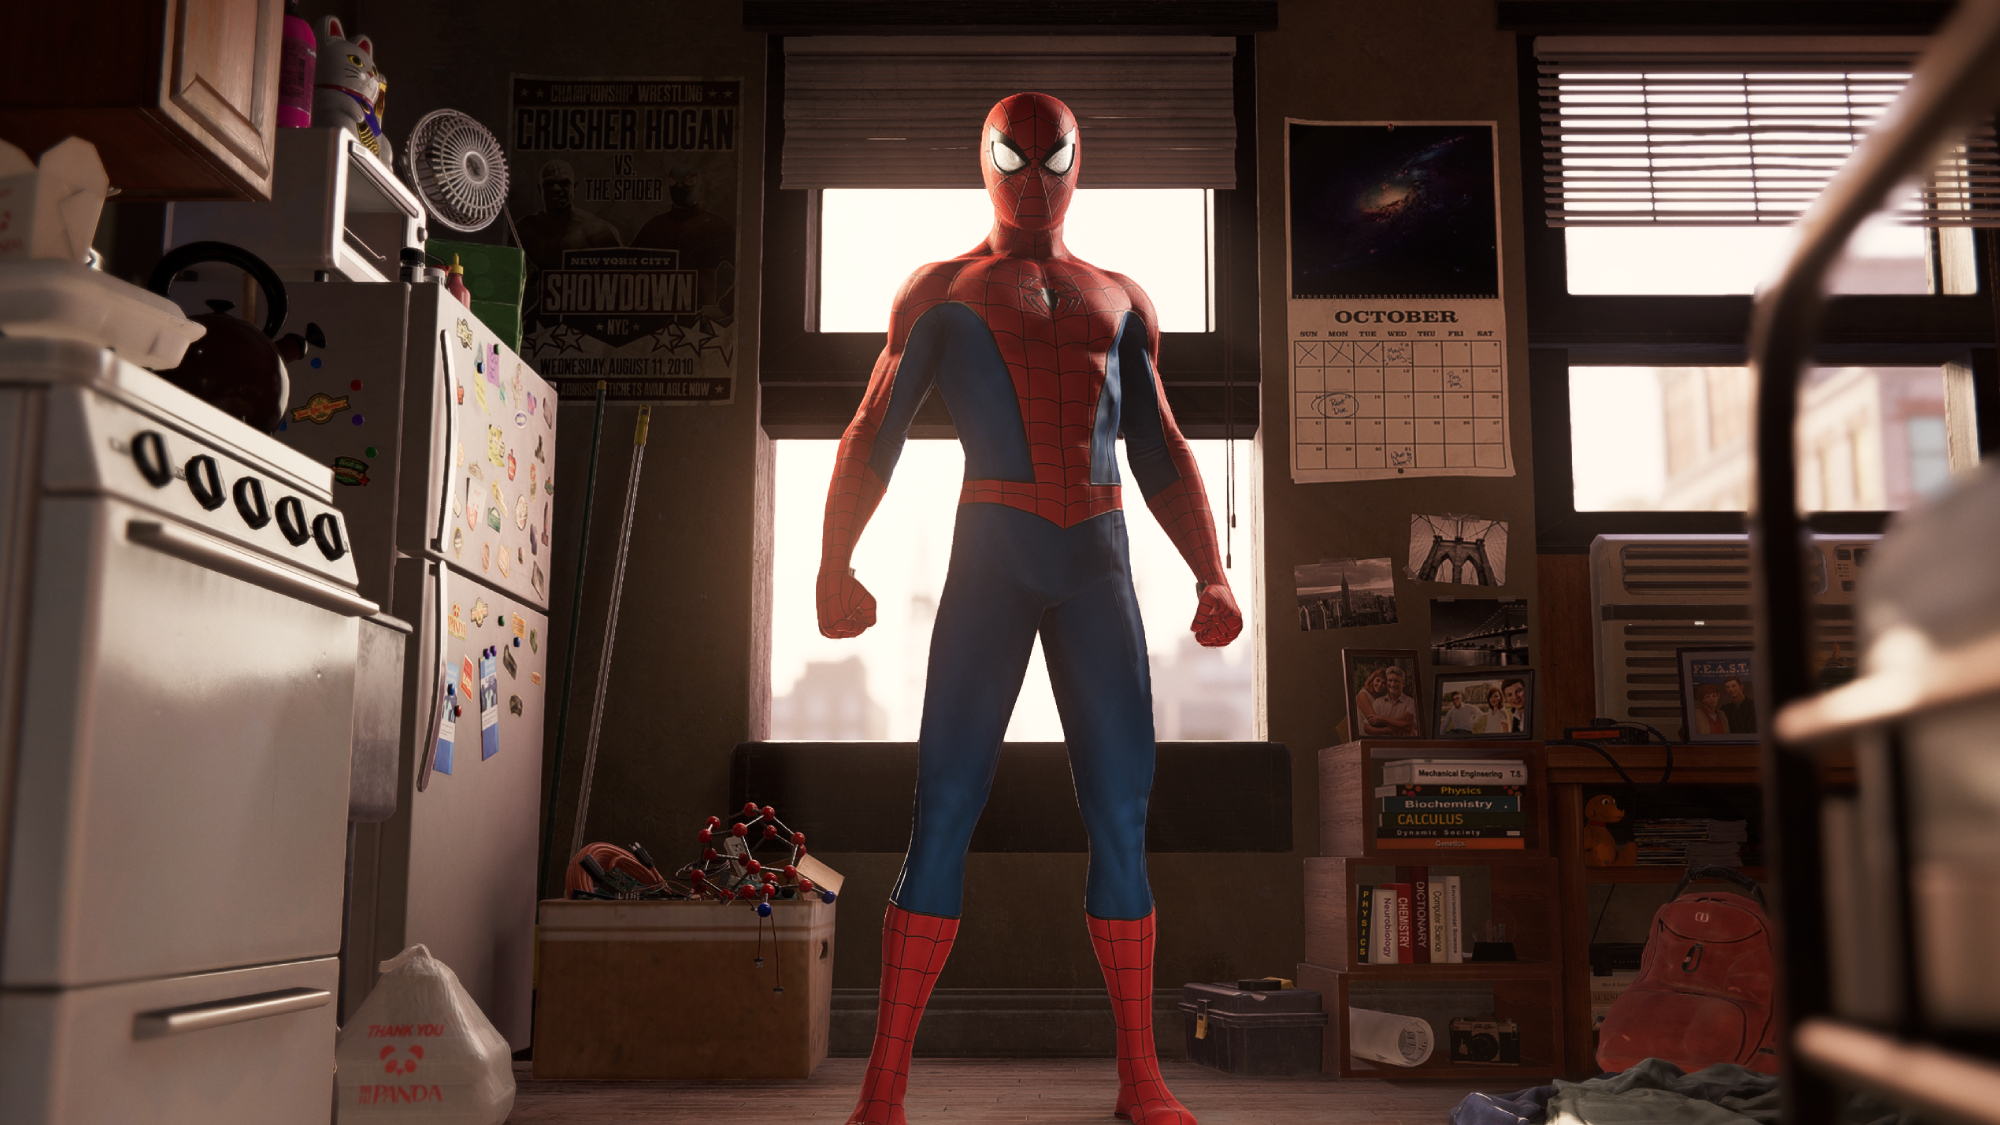 Can Your PC Run Spider-Man Remastered?